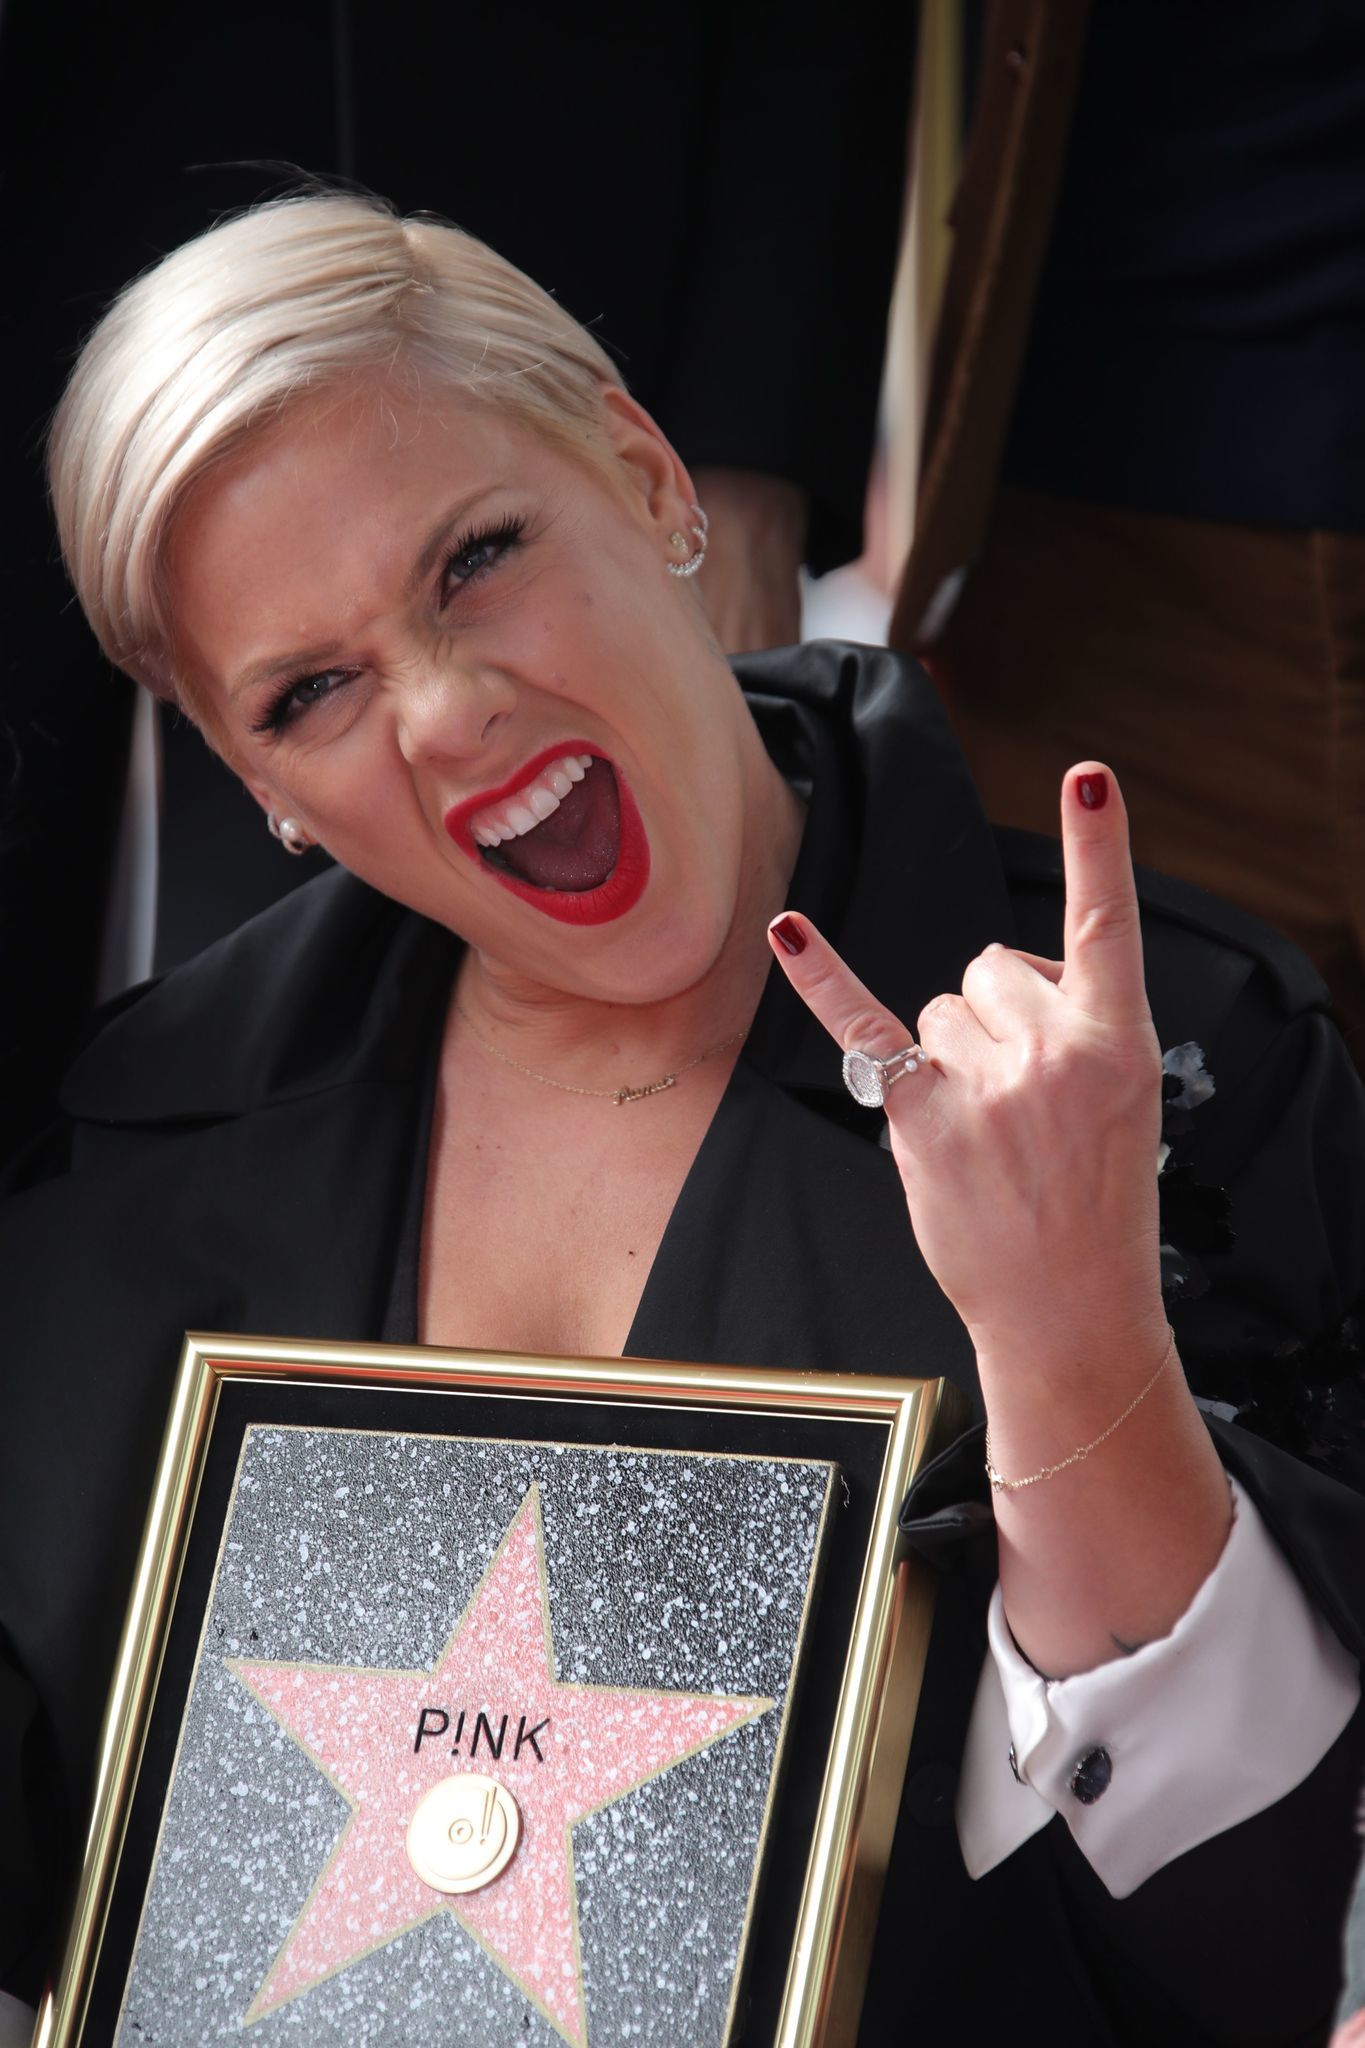 Pink gets her very own (pink) star on the Hollywood Walk of Fame in Los Angeles on Feb. 5, 2019.